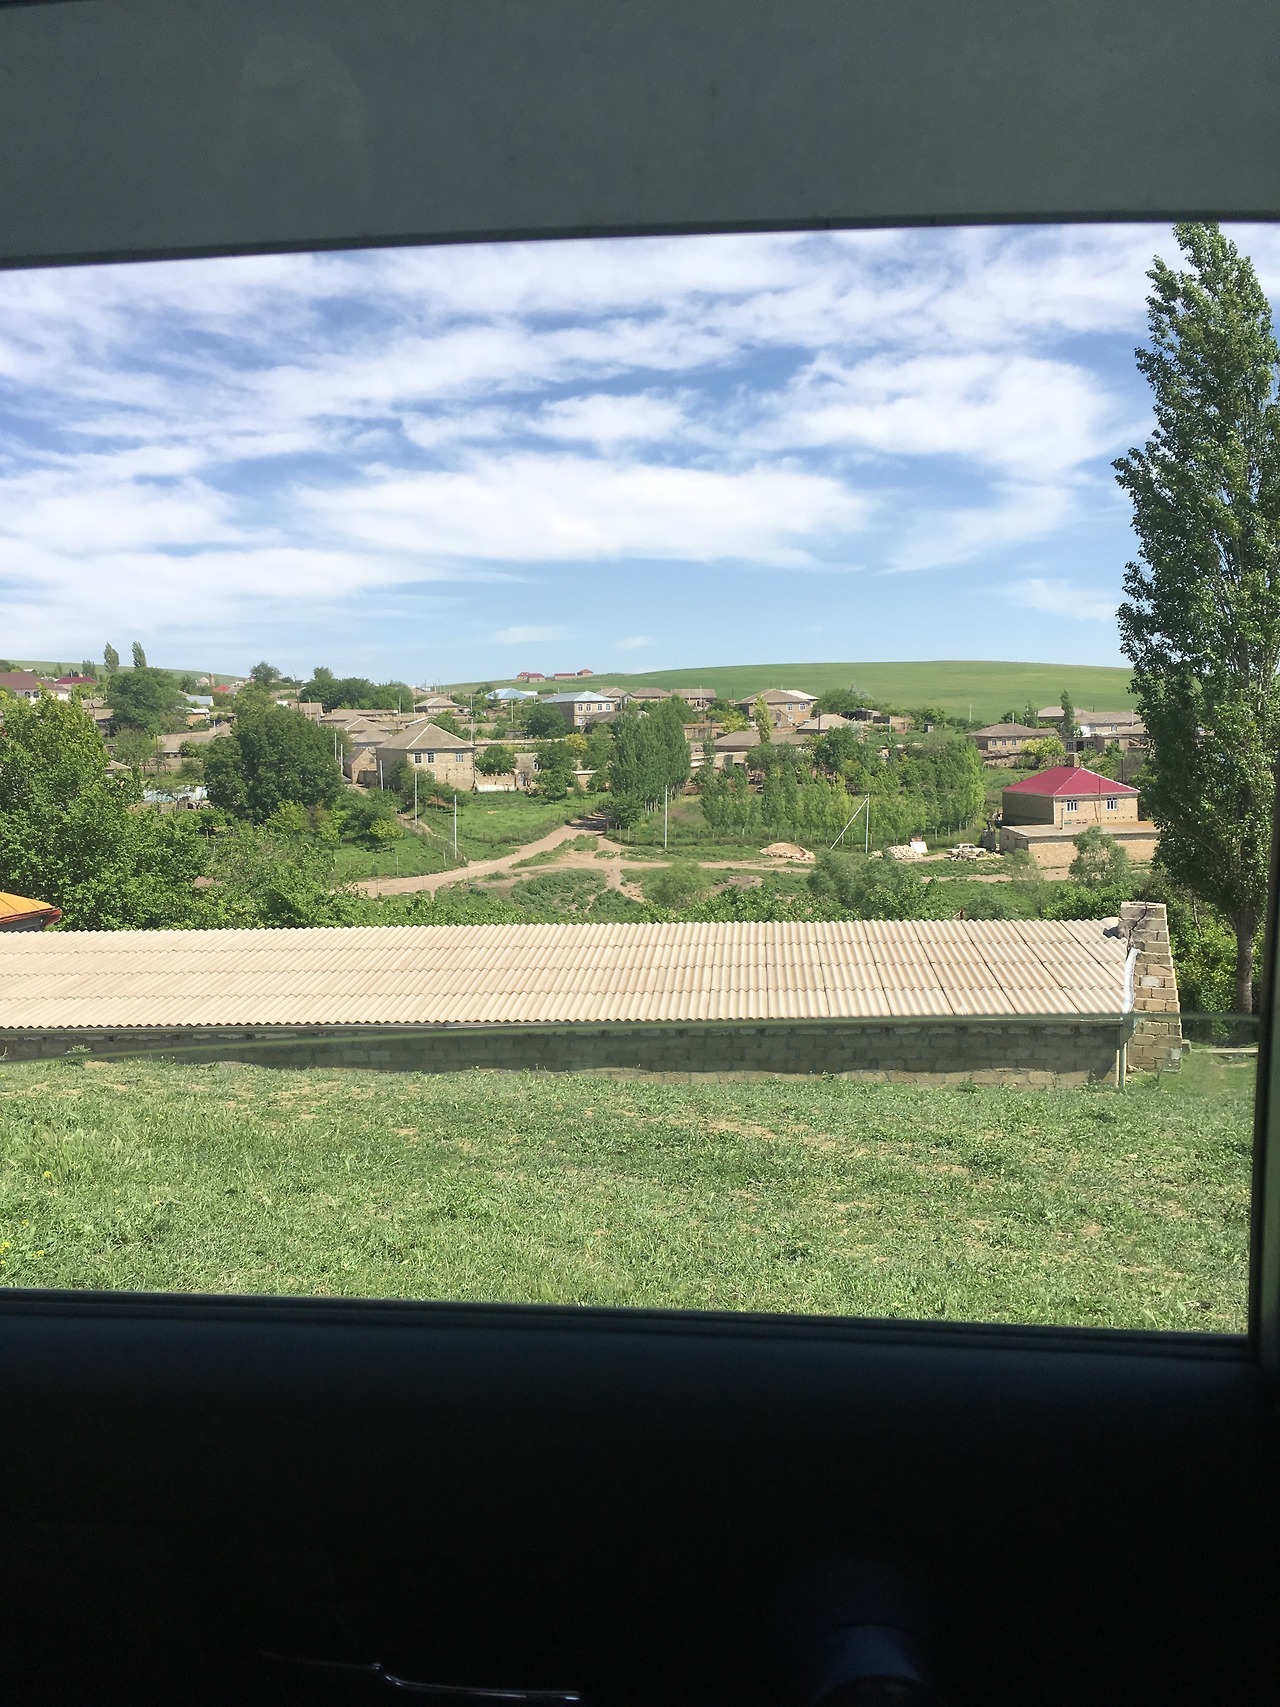 Chilov: How Could a Place Contain a Life?We left our apartment this morning for a village in central Azerbaijan called Chilov. Our mission was to interview local carpet weavers about the process of making flat-weave (Kilim) carpets. We didn’t know...